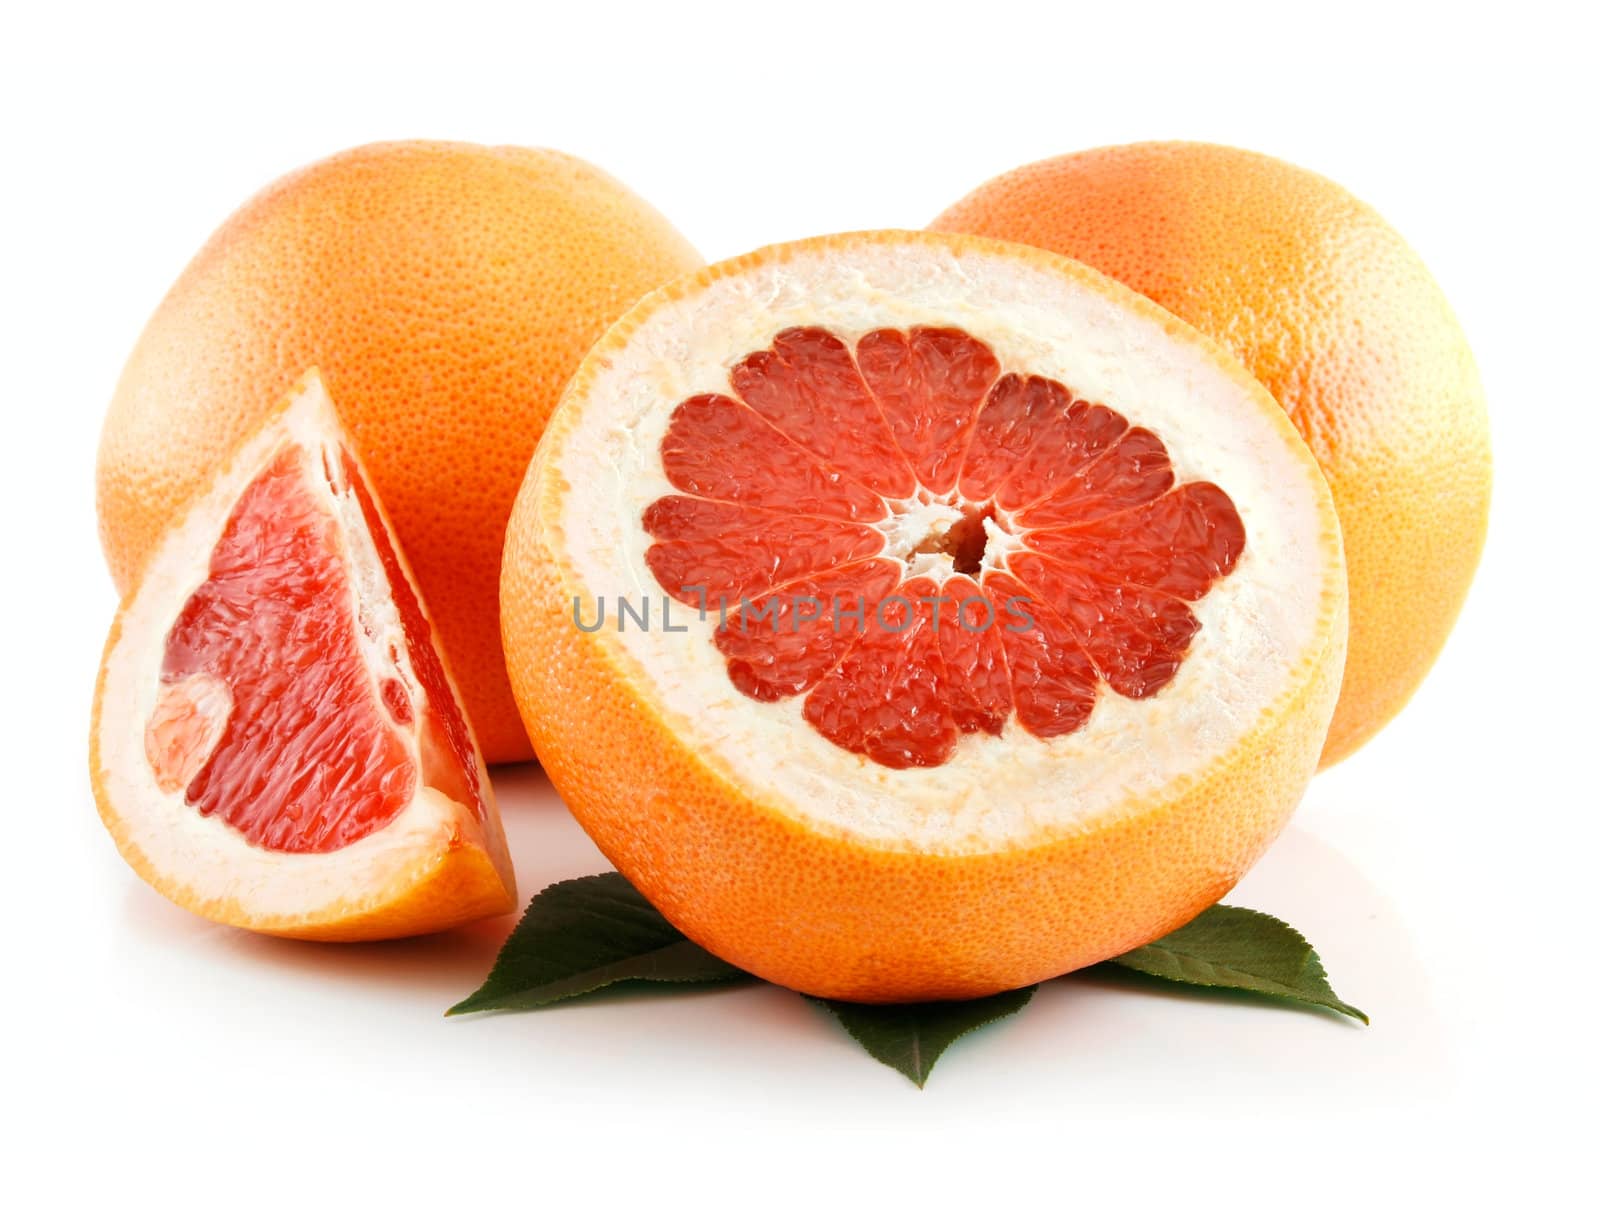 Ripe Sliced Grapefruit with Leaves Isolated on White Background